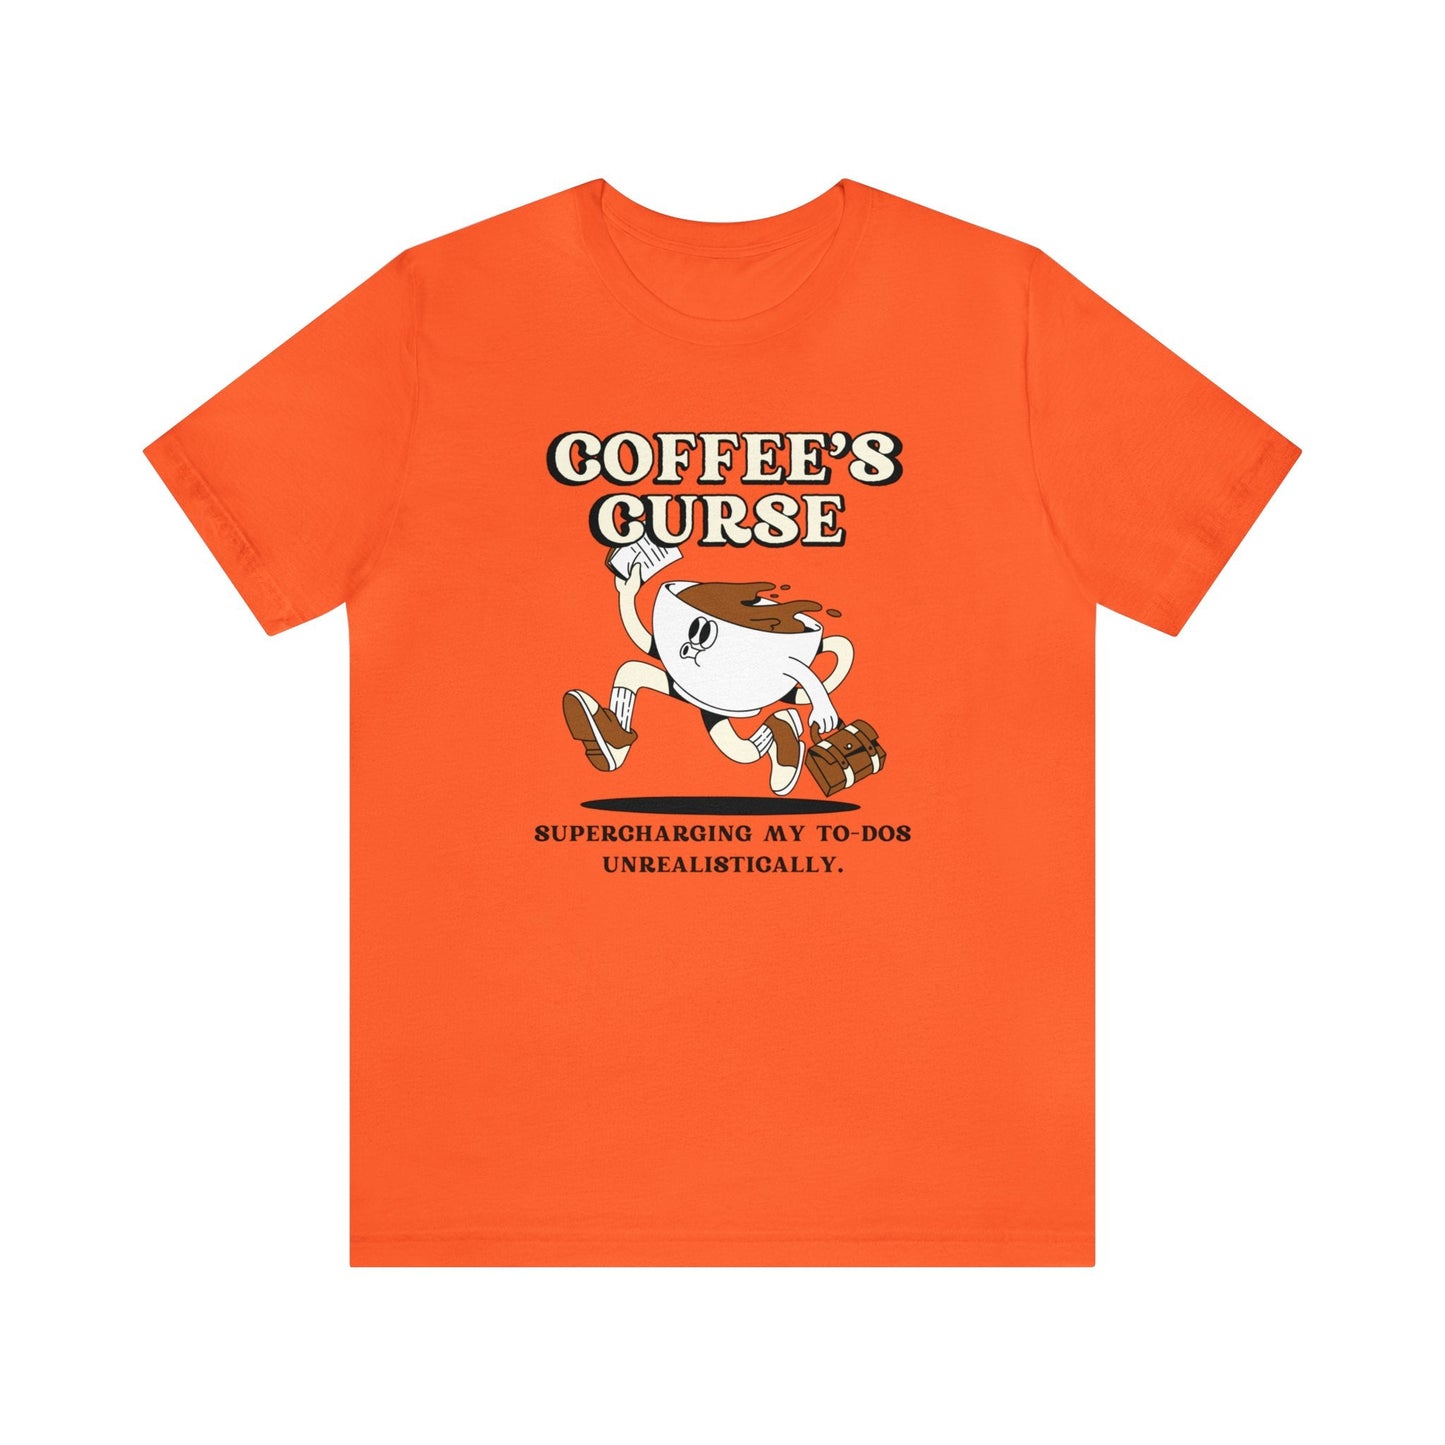 Coffee's curse Supercharging my to-dos unrealistically T-shirt. - InkArt Fashions